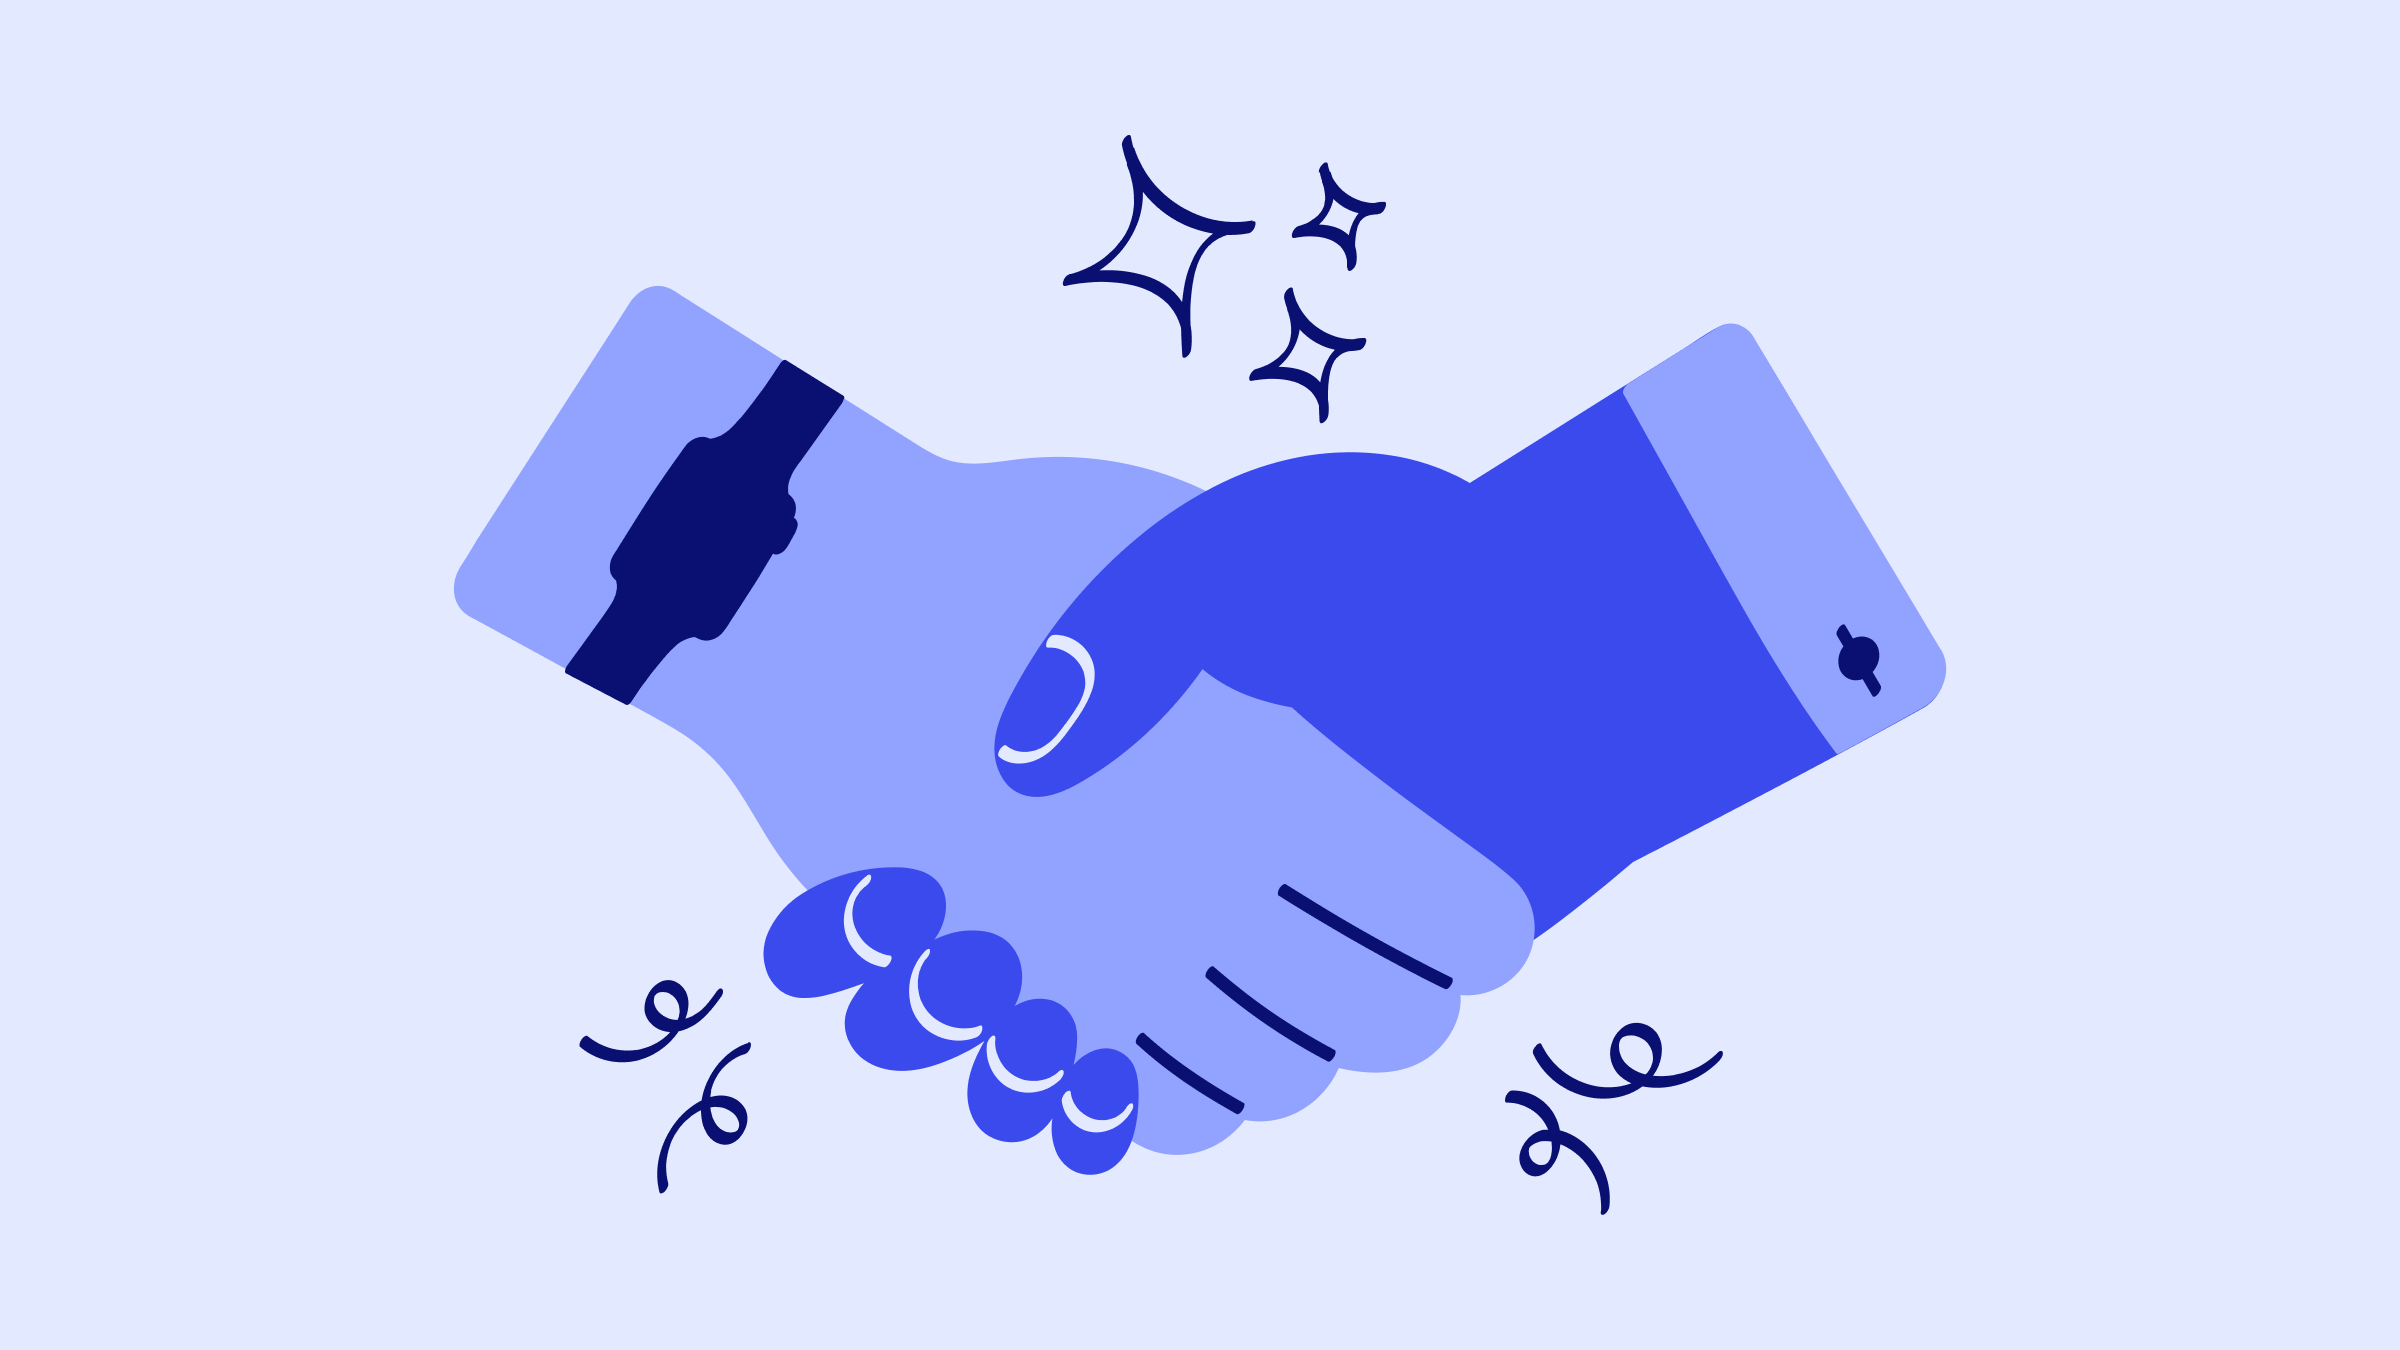 A purple drawing of a handshake.